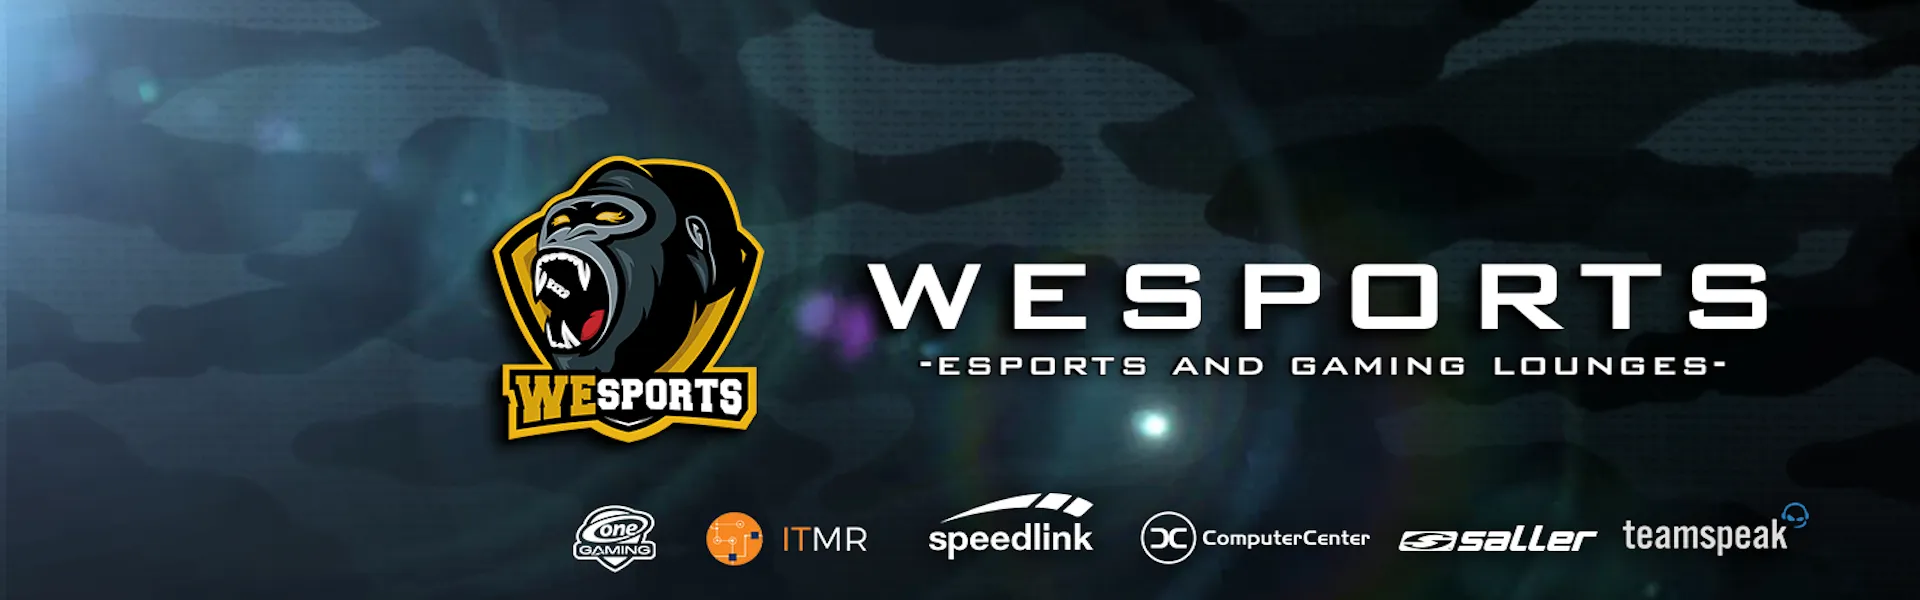 WeSports banner